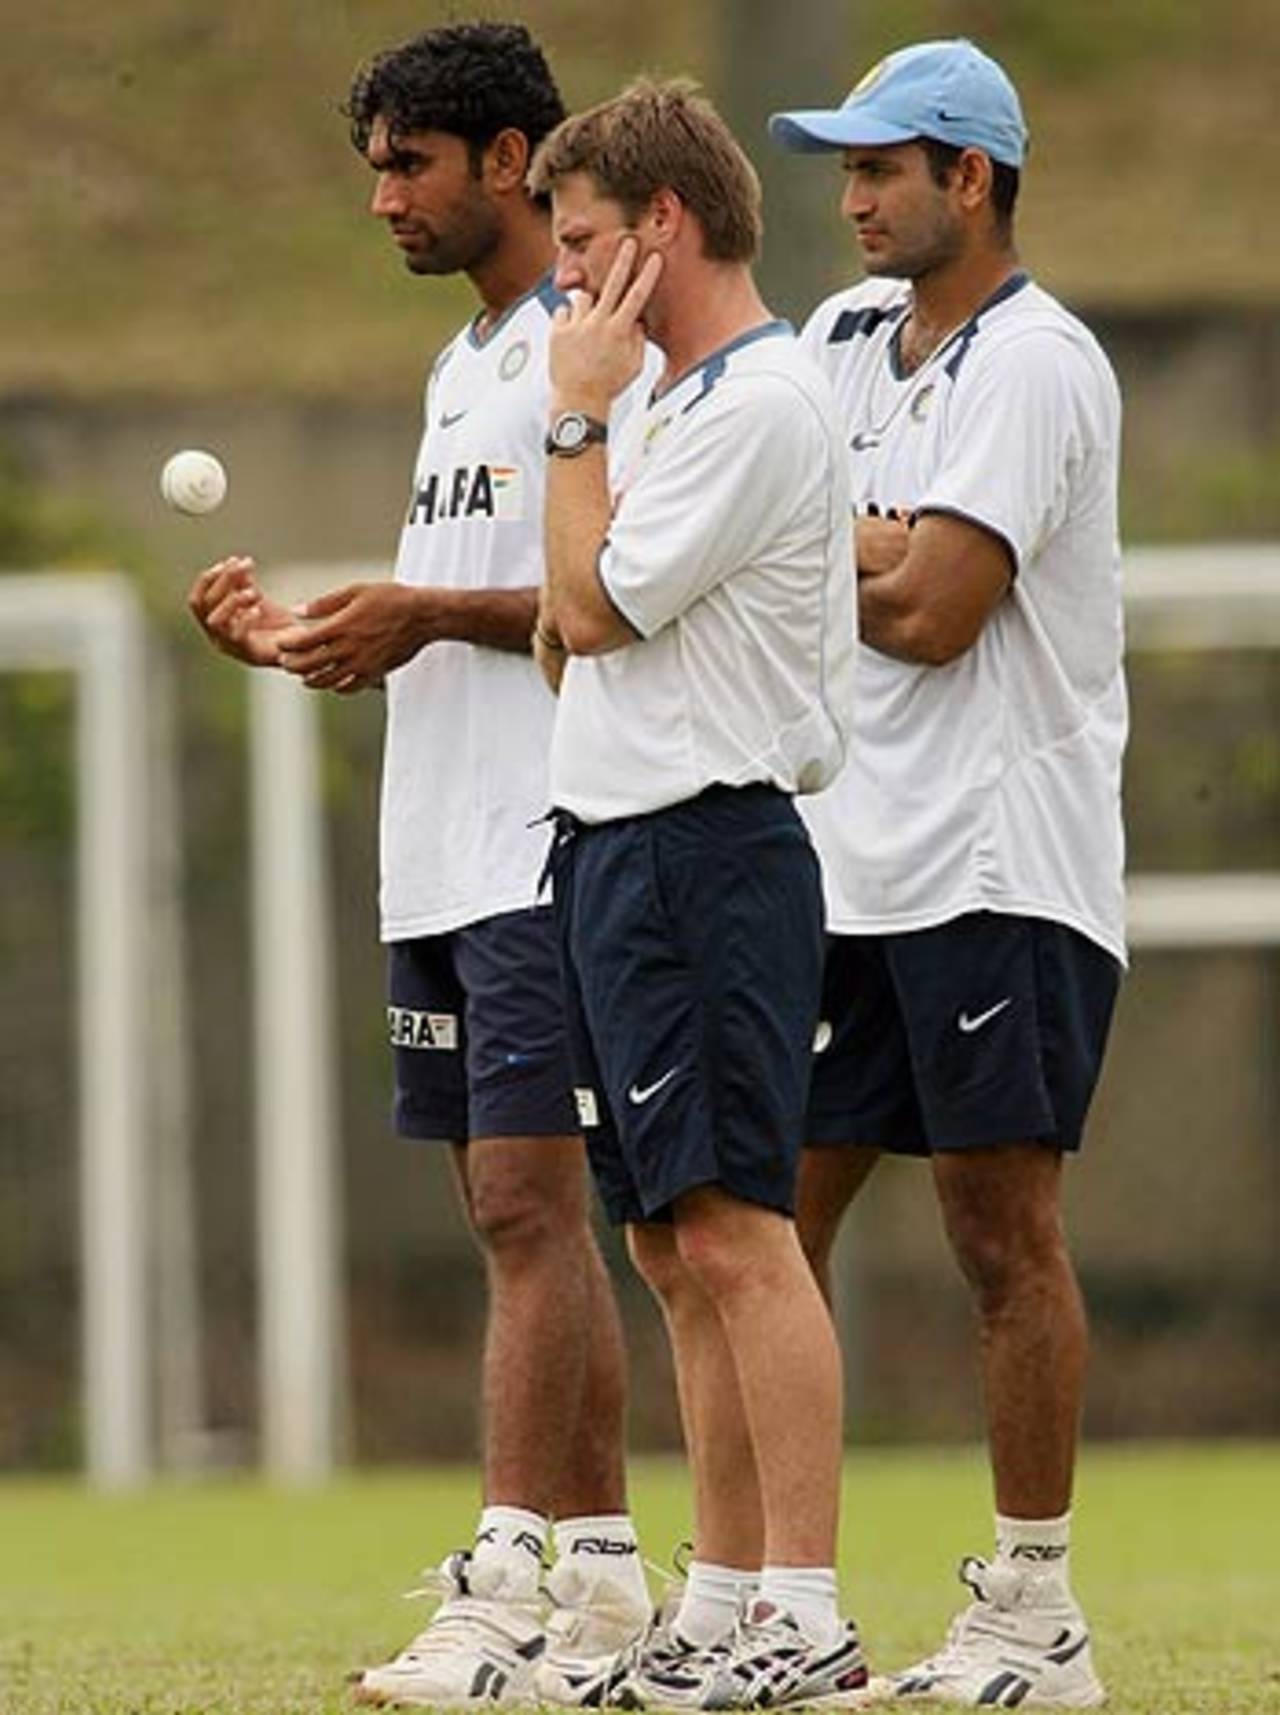 Munaf Patel and Irfan Pathan in the nets with John Gloster, at the Kinrara Academy Oval, Kuala Lumpur, September 19, 2006